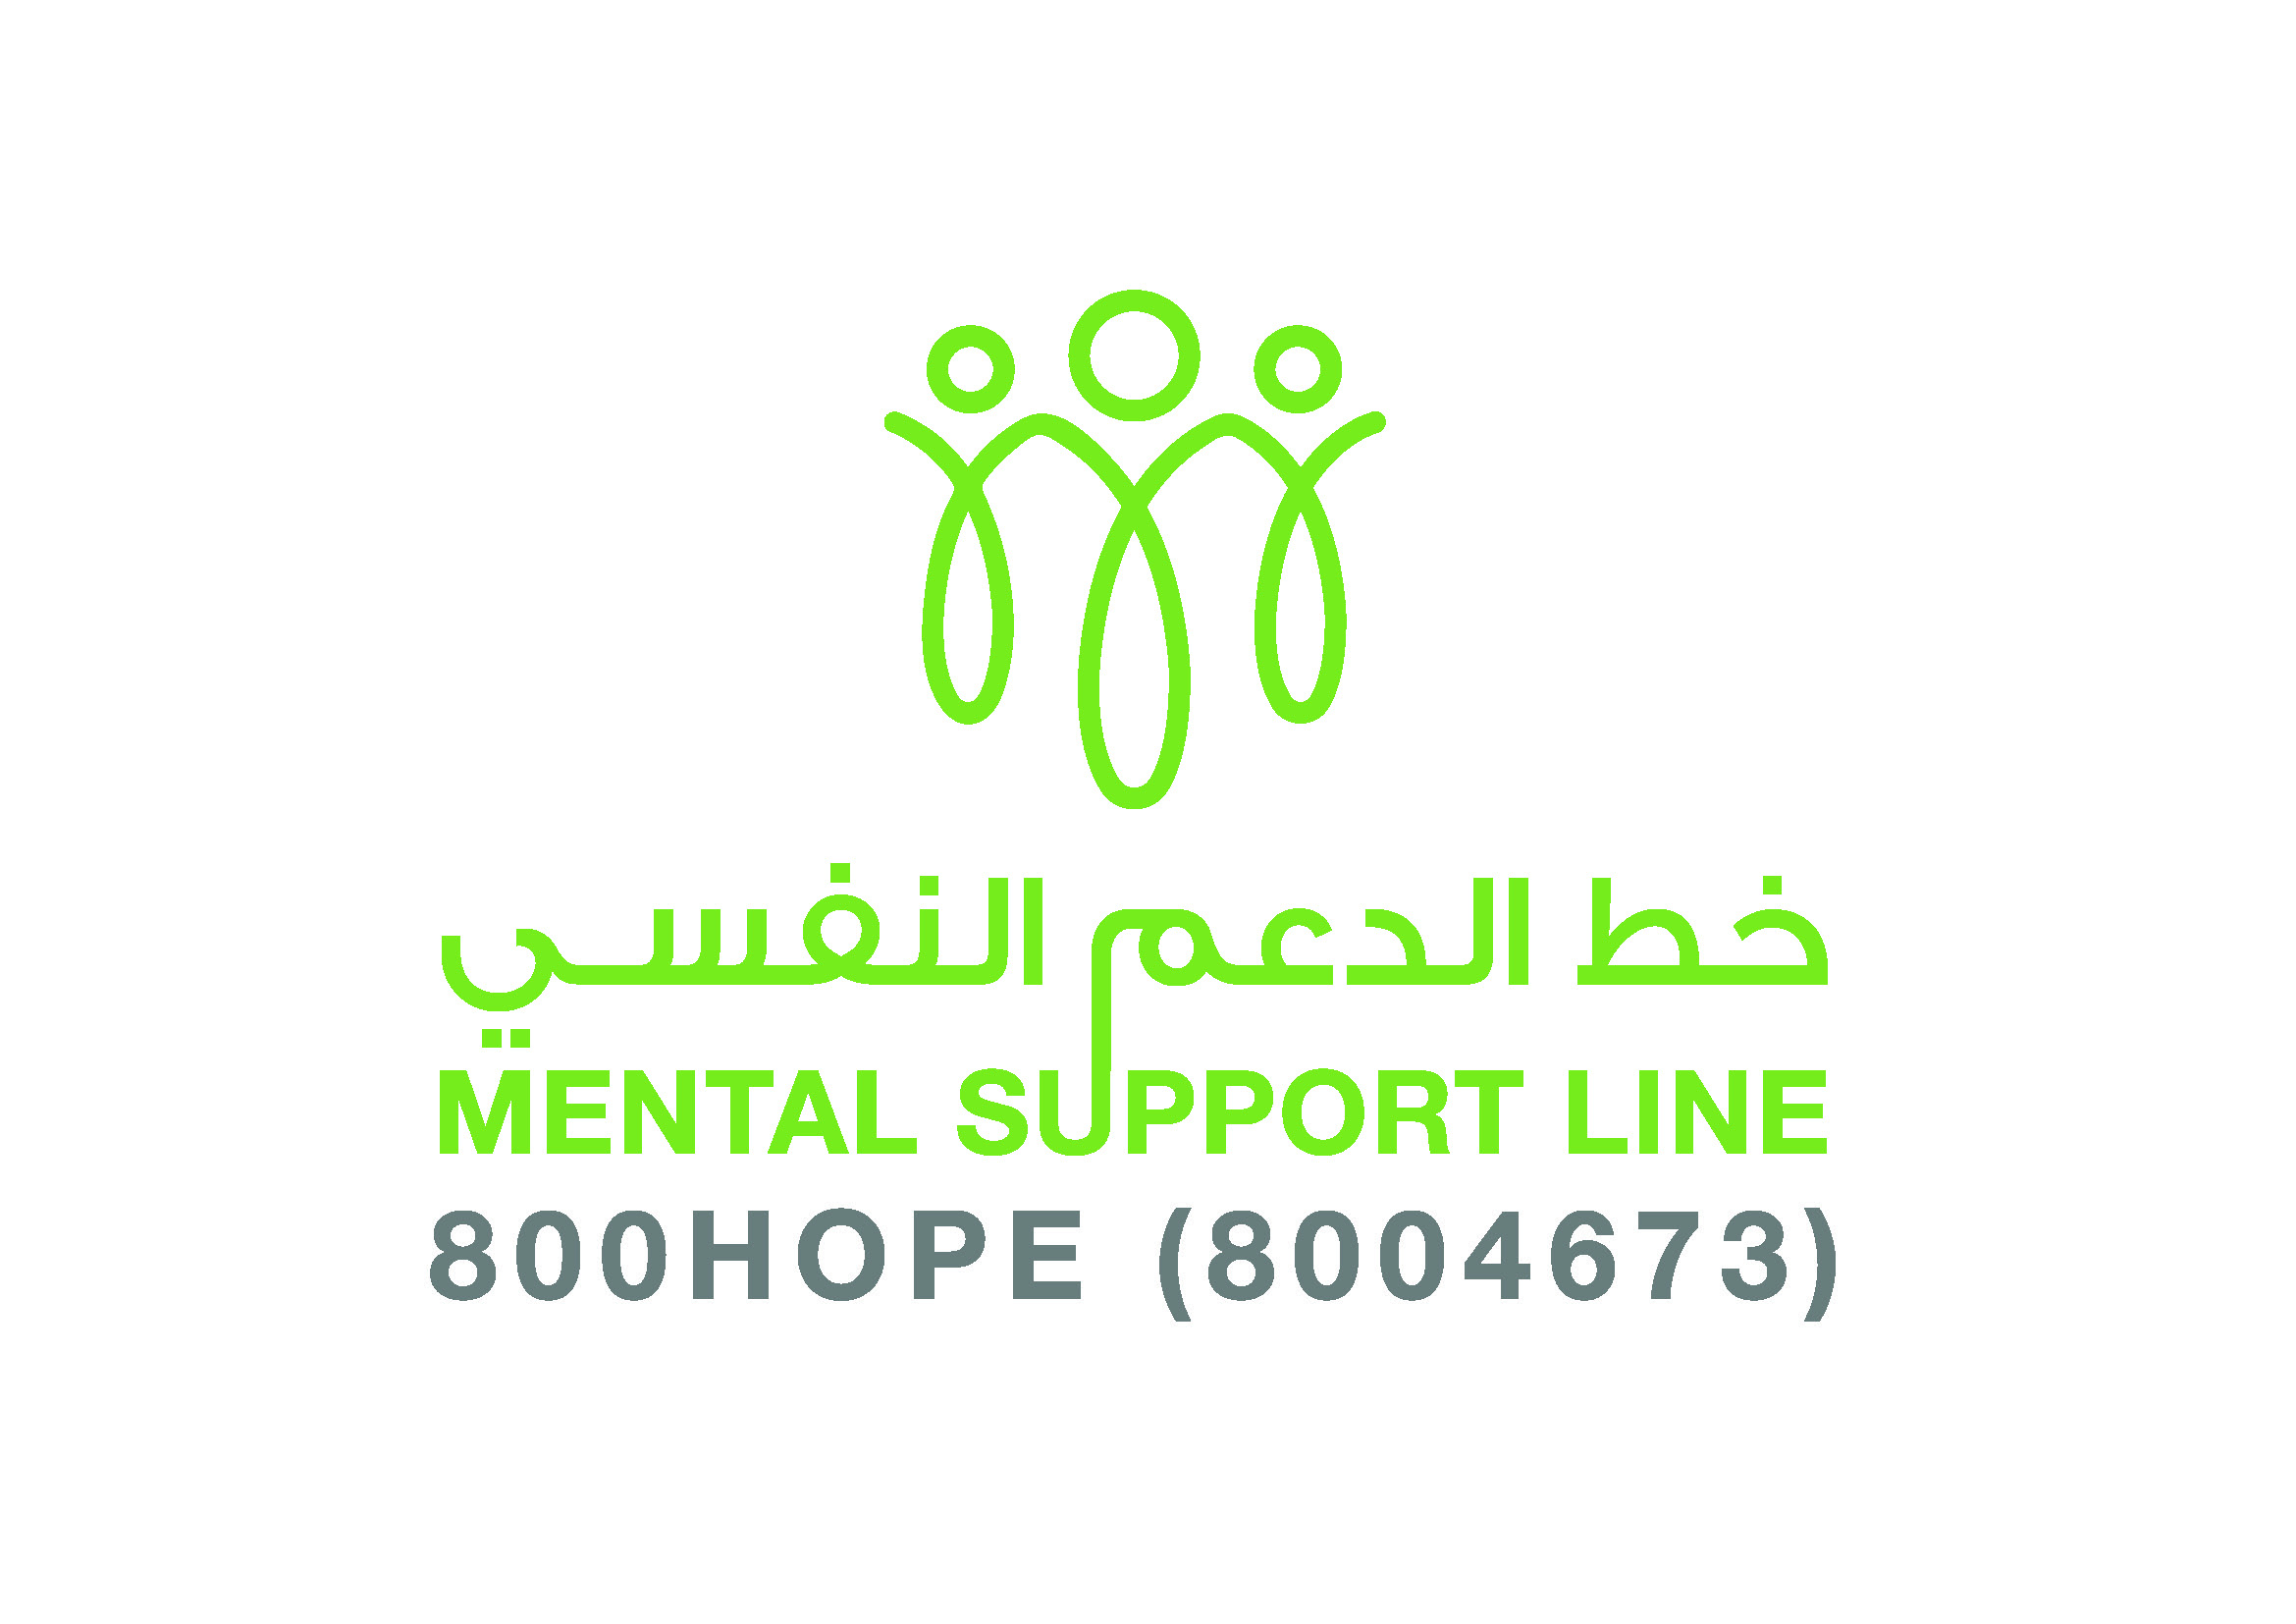 UAE National Happiness Programme Launches Mental Health Hotline